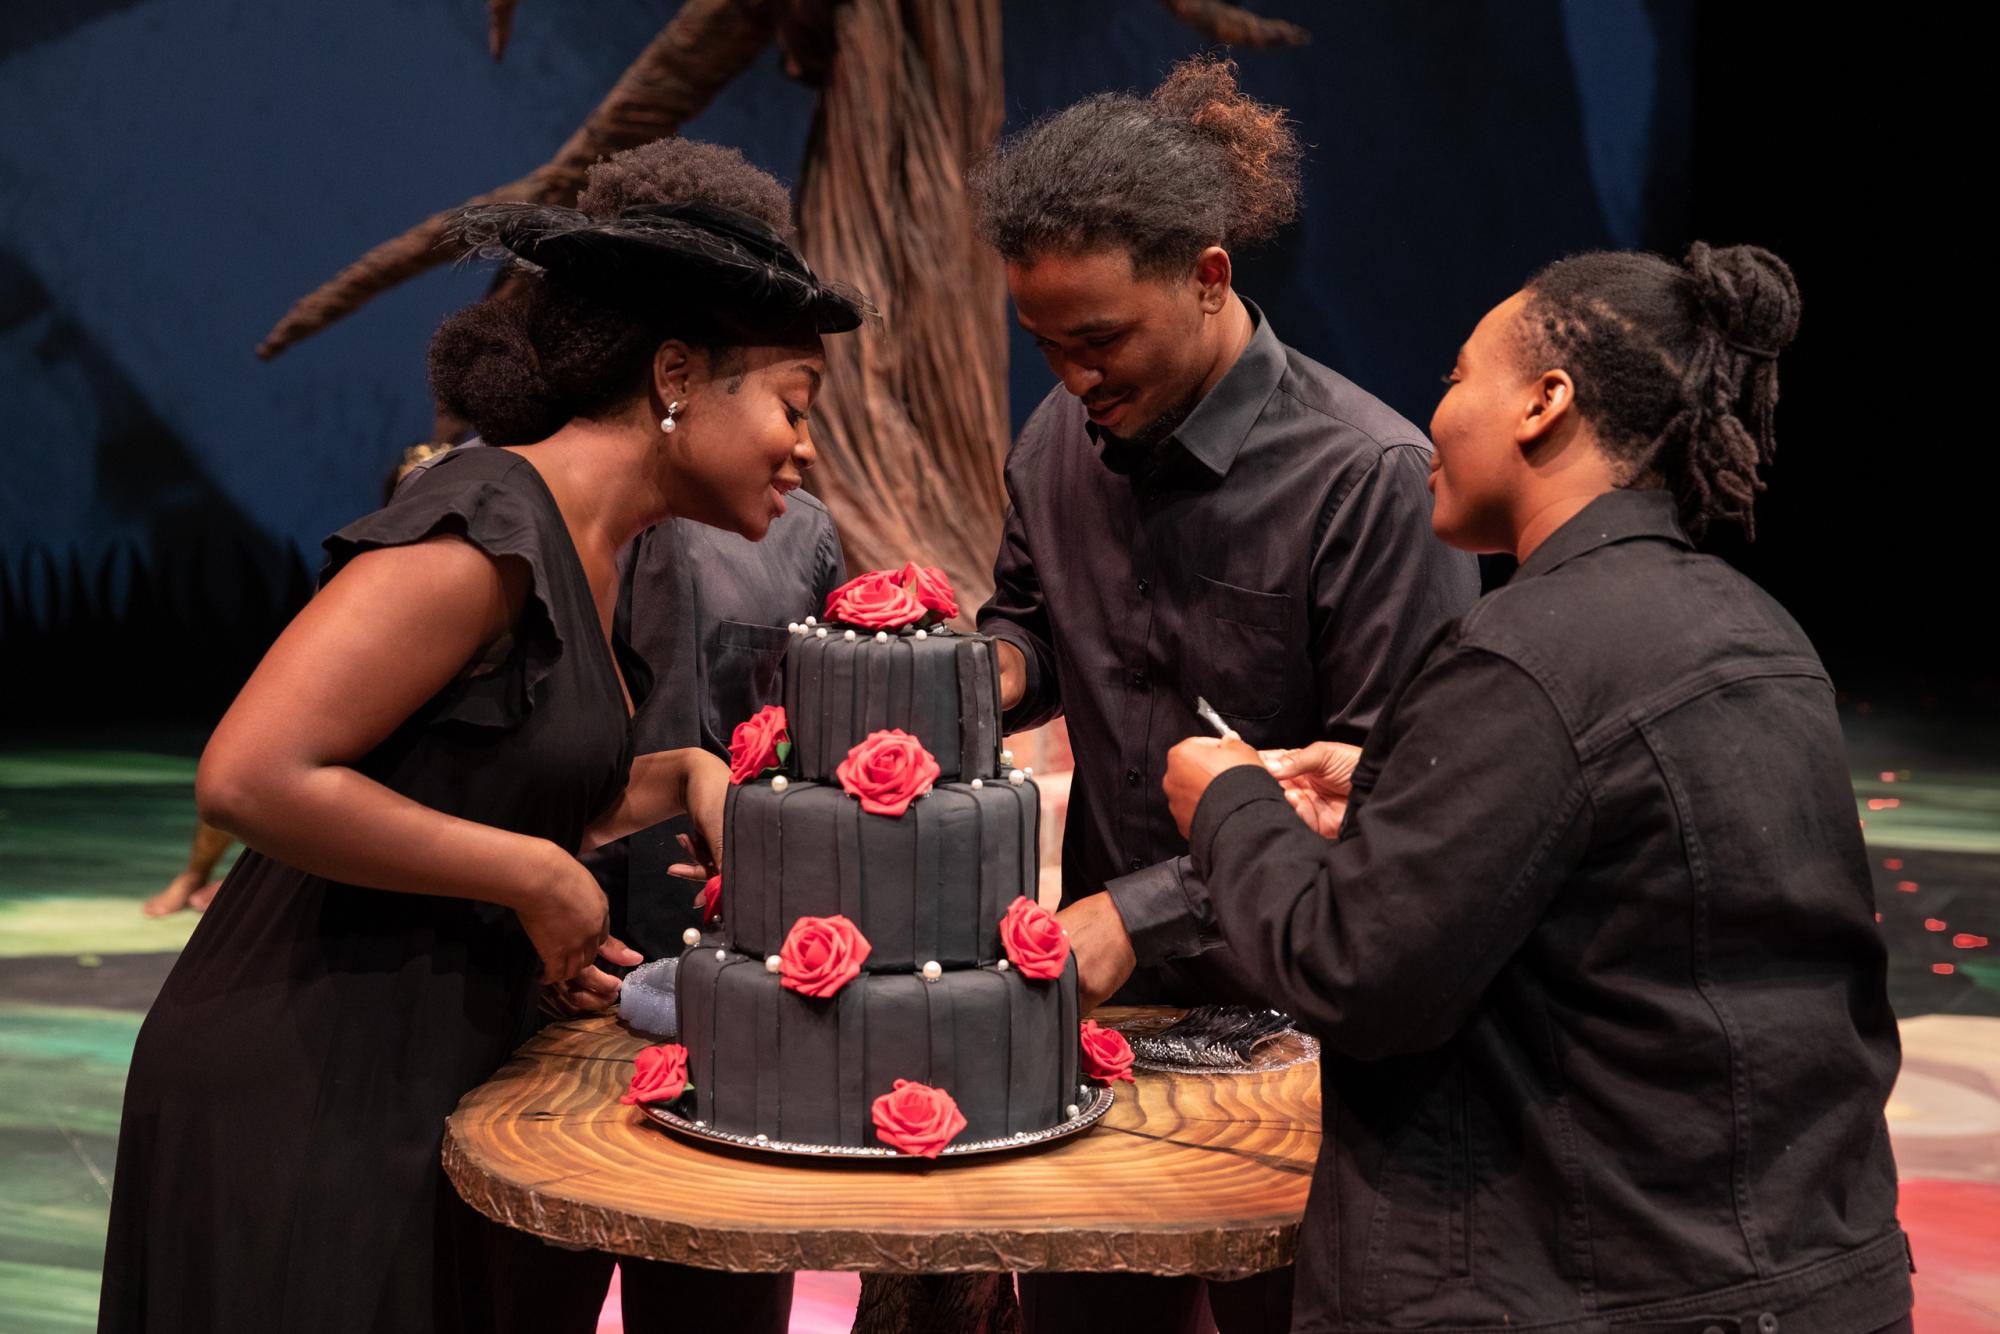 Three people dressed in black cut a black cake with red roses on it